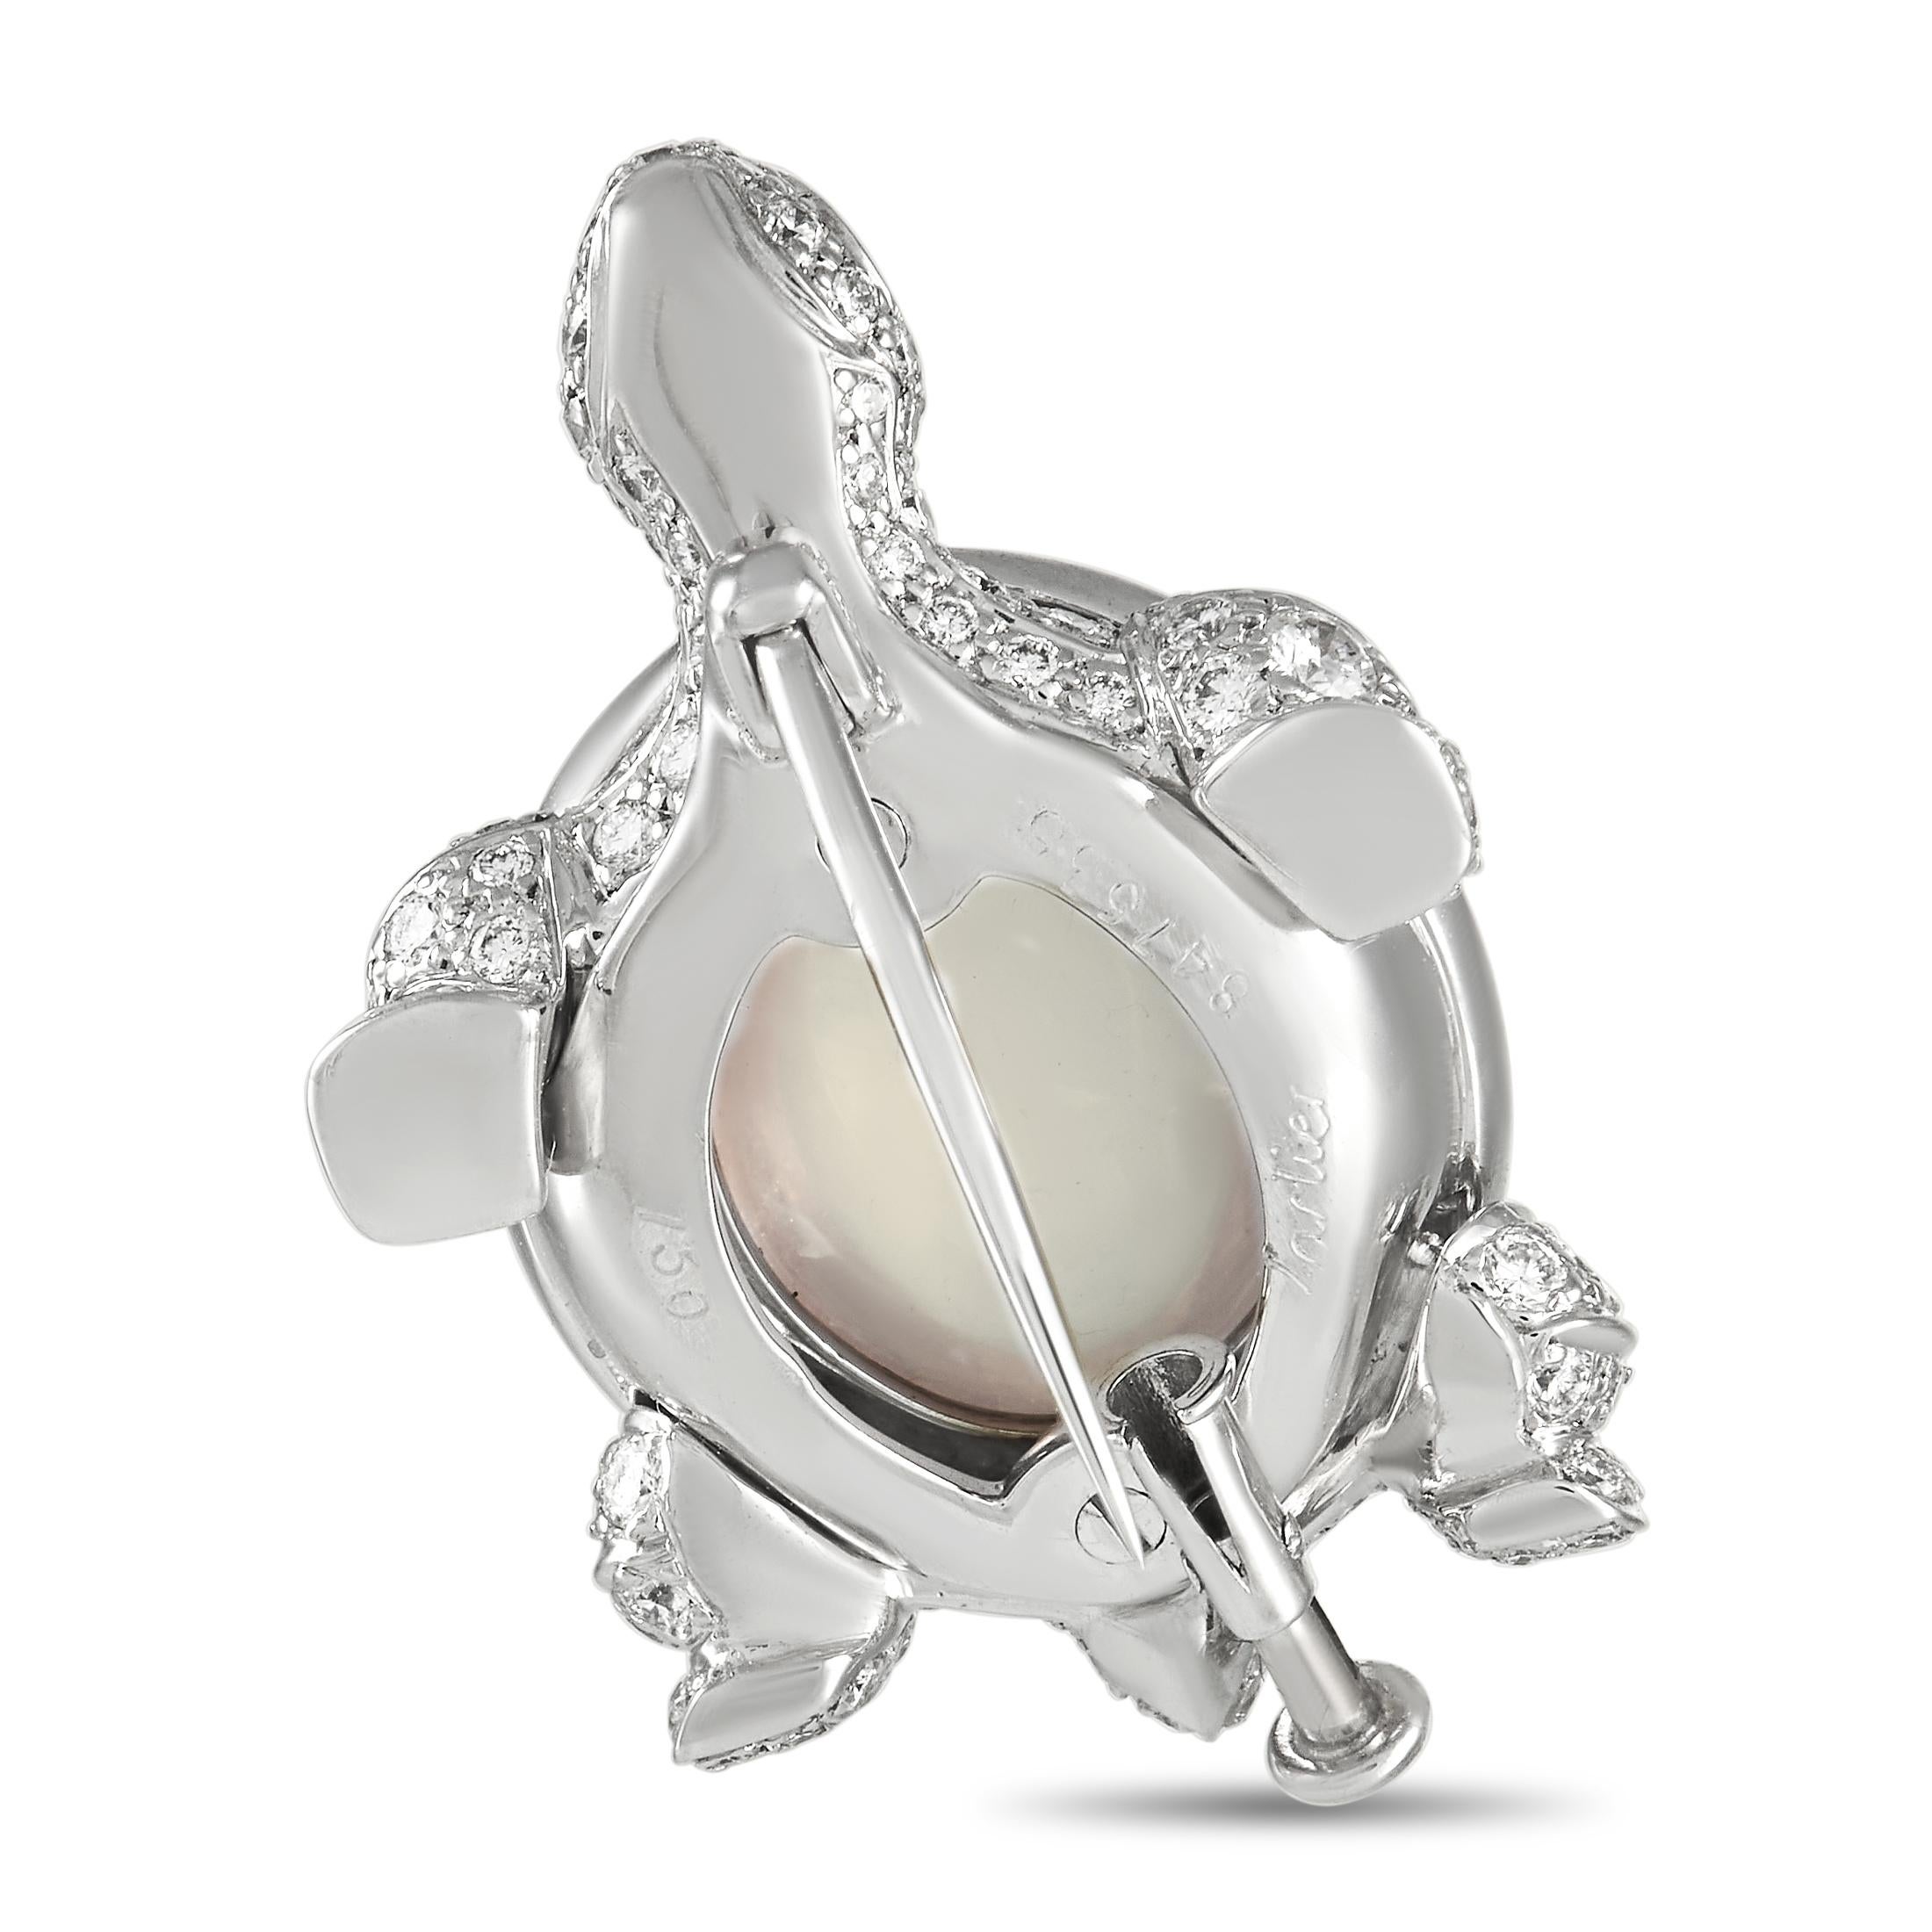 This extremely rare brooch from Cartier is equal parts sweet and sophisticated. The charming turtle motif is elevated by diamonds totaling 1.25 carats with E color and VVS clarity. A rose quartz stone at the center adds a subtle pop of color to this